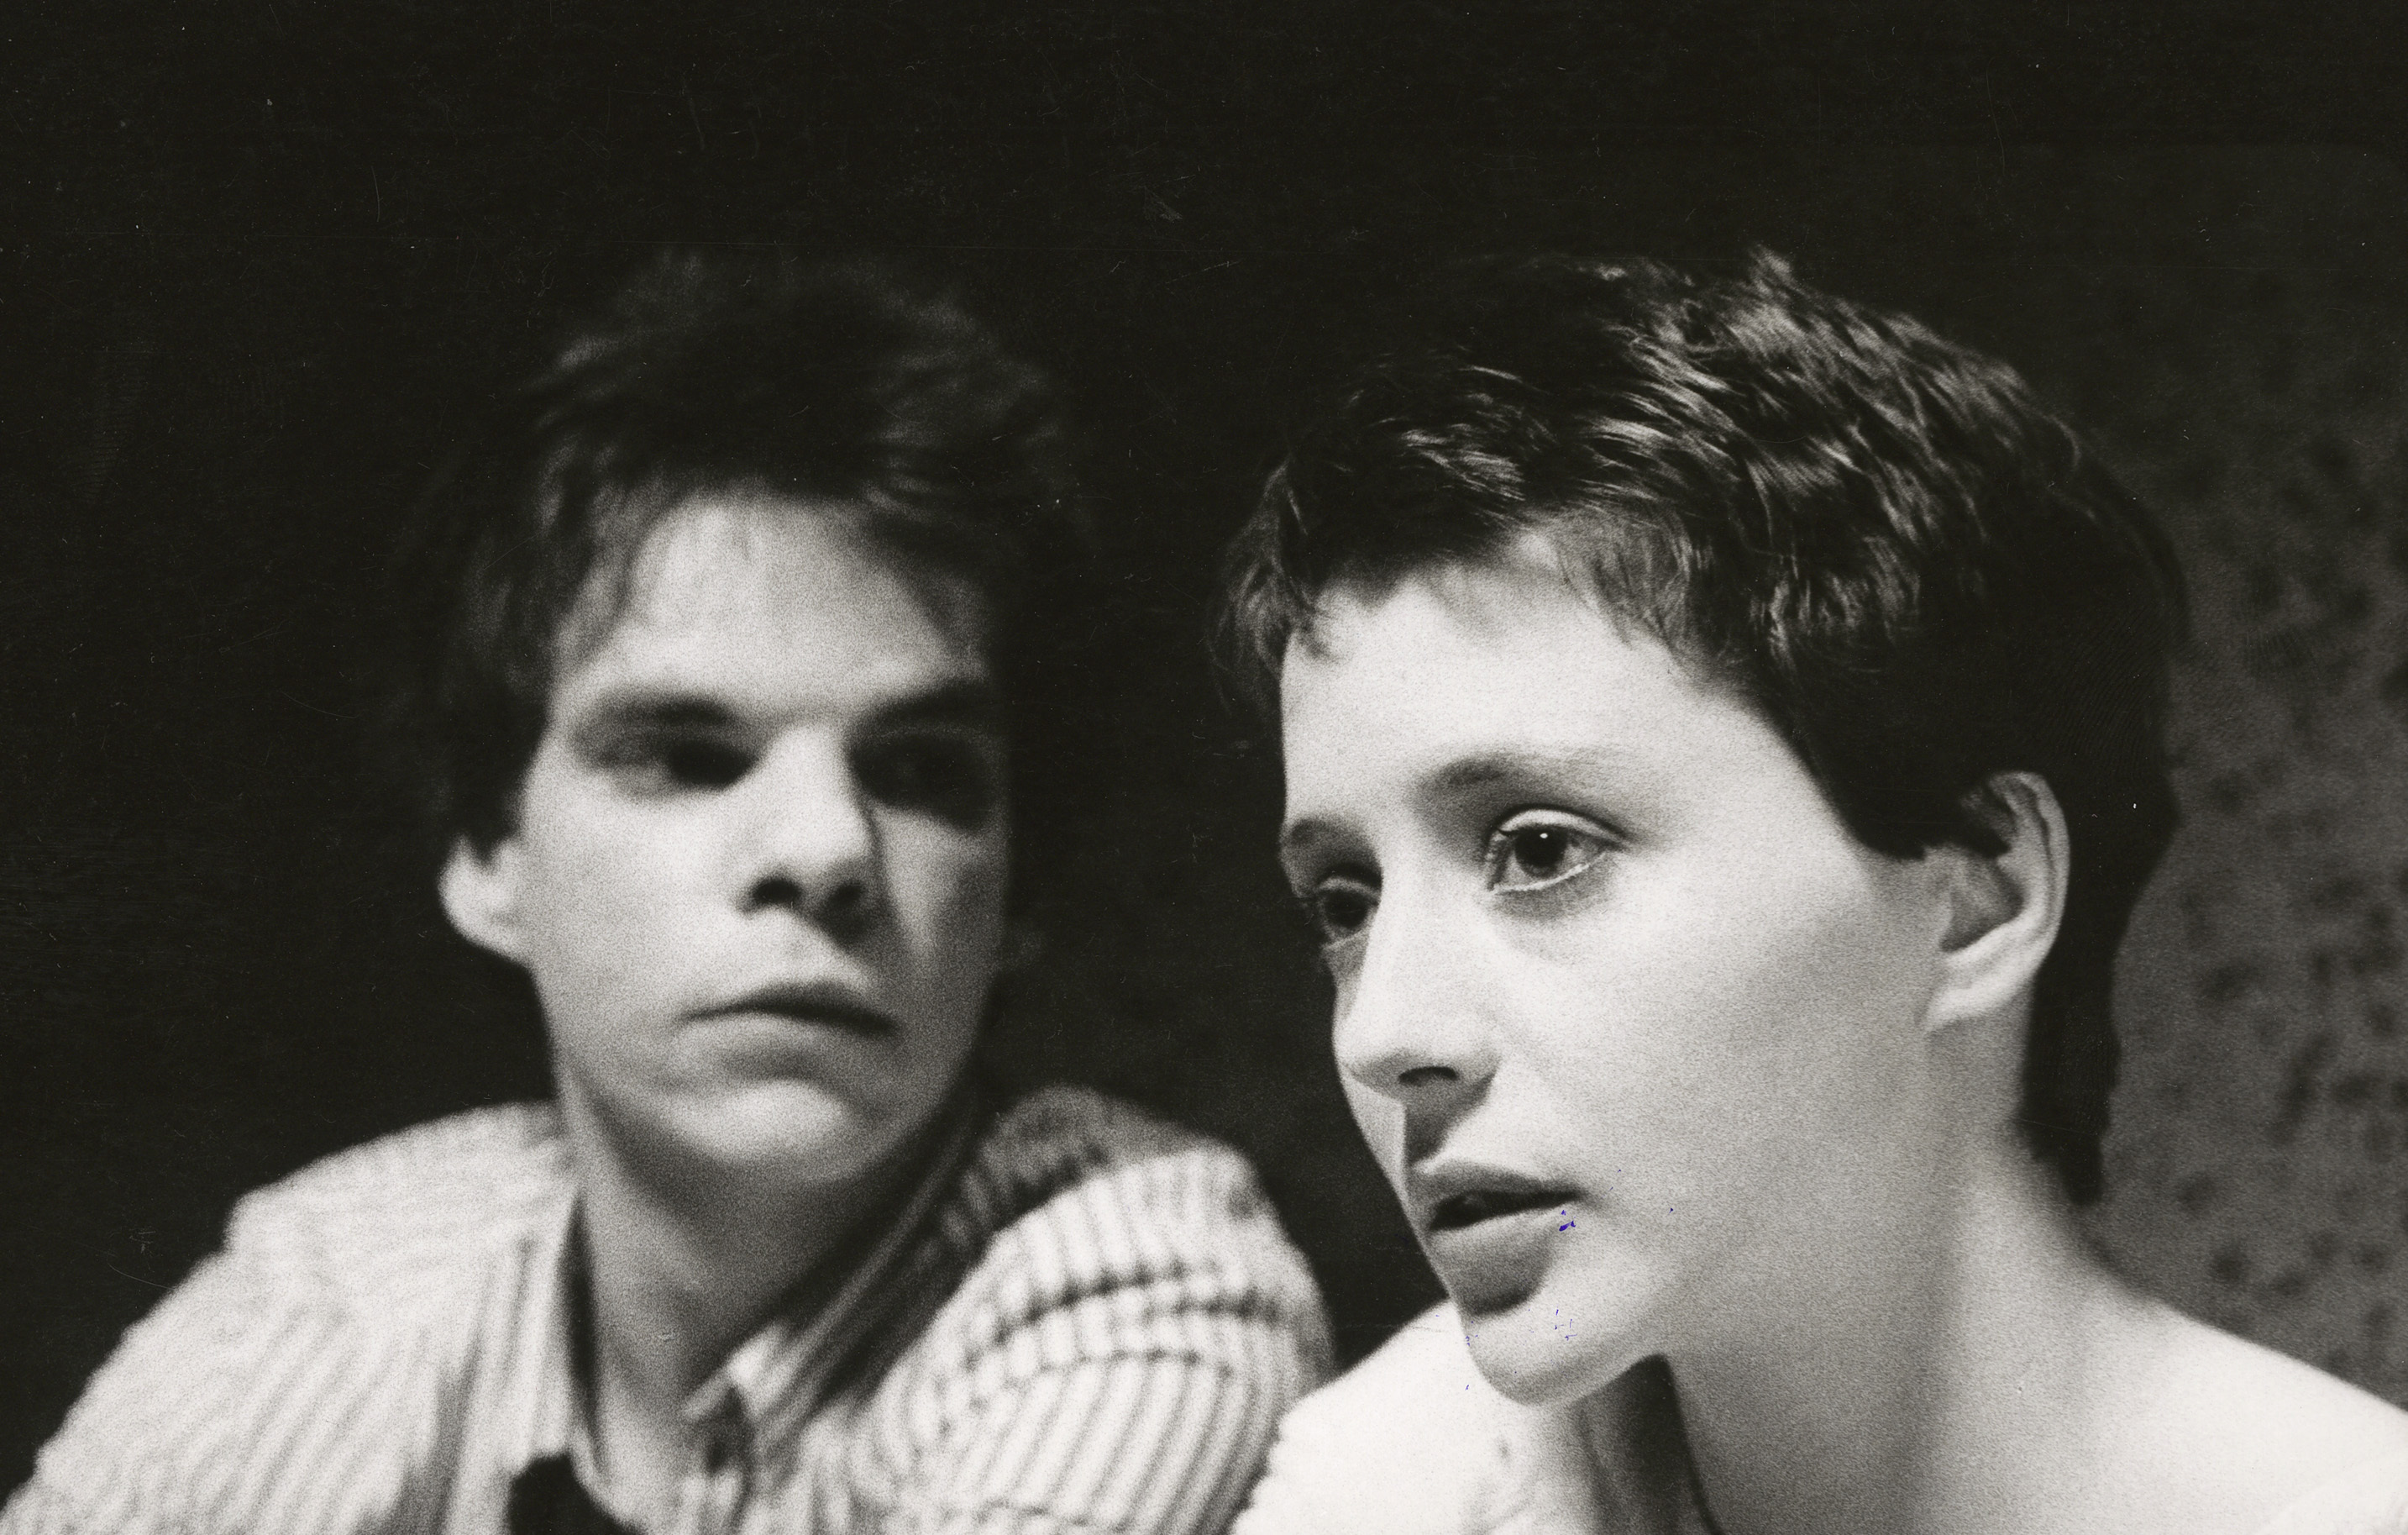 Boy Meets Girl 1984 Directed By Leos Carax Film Review